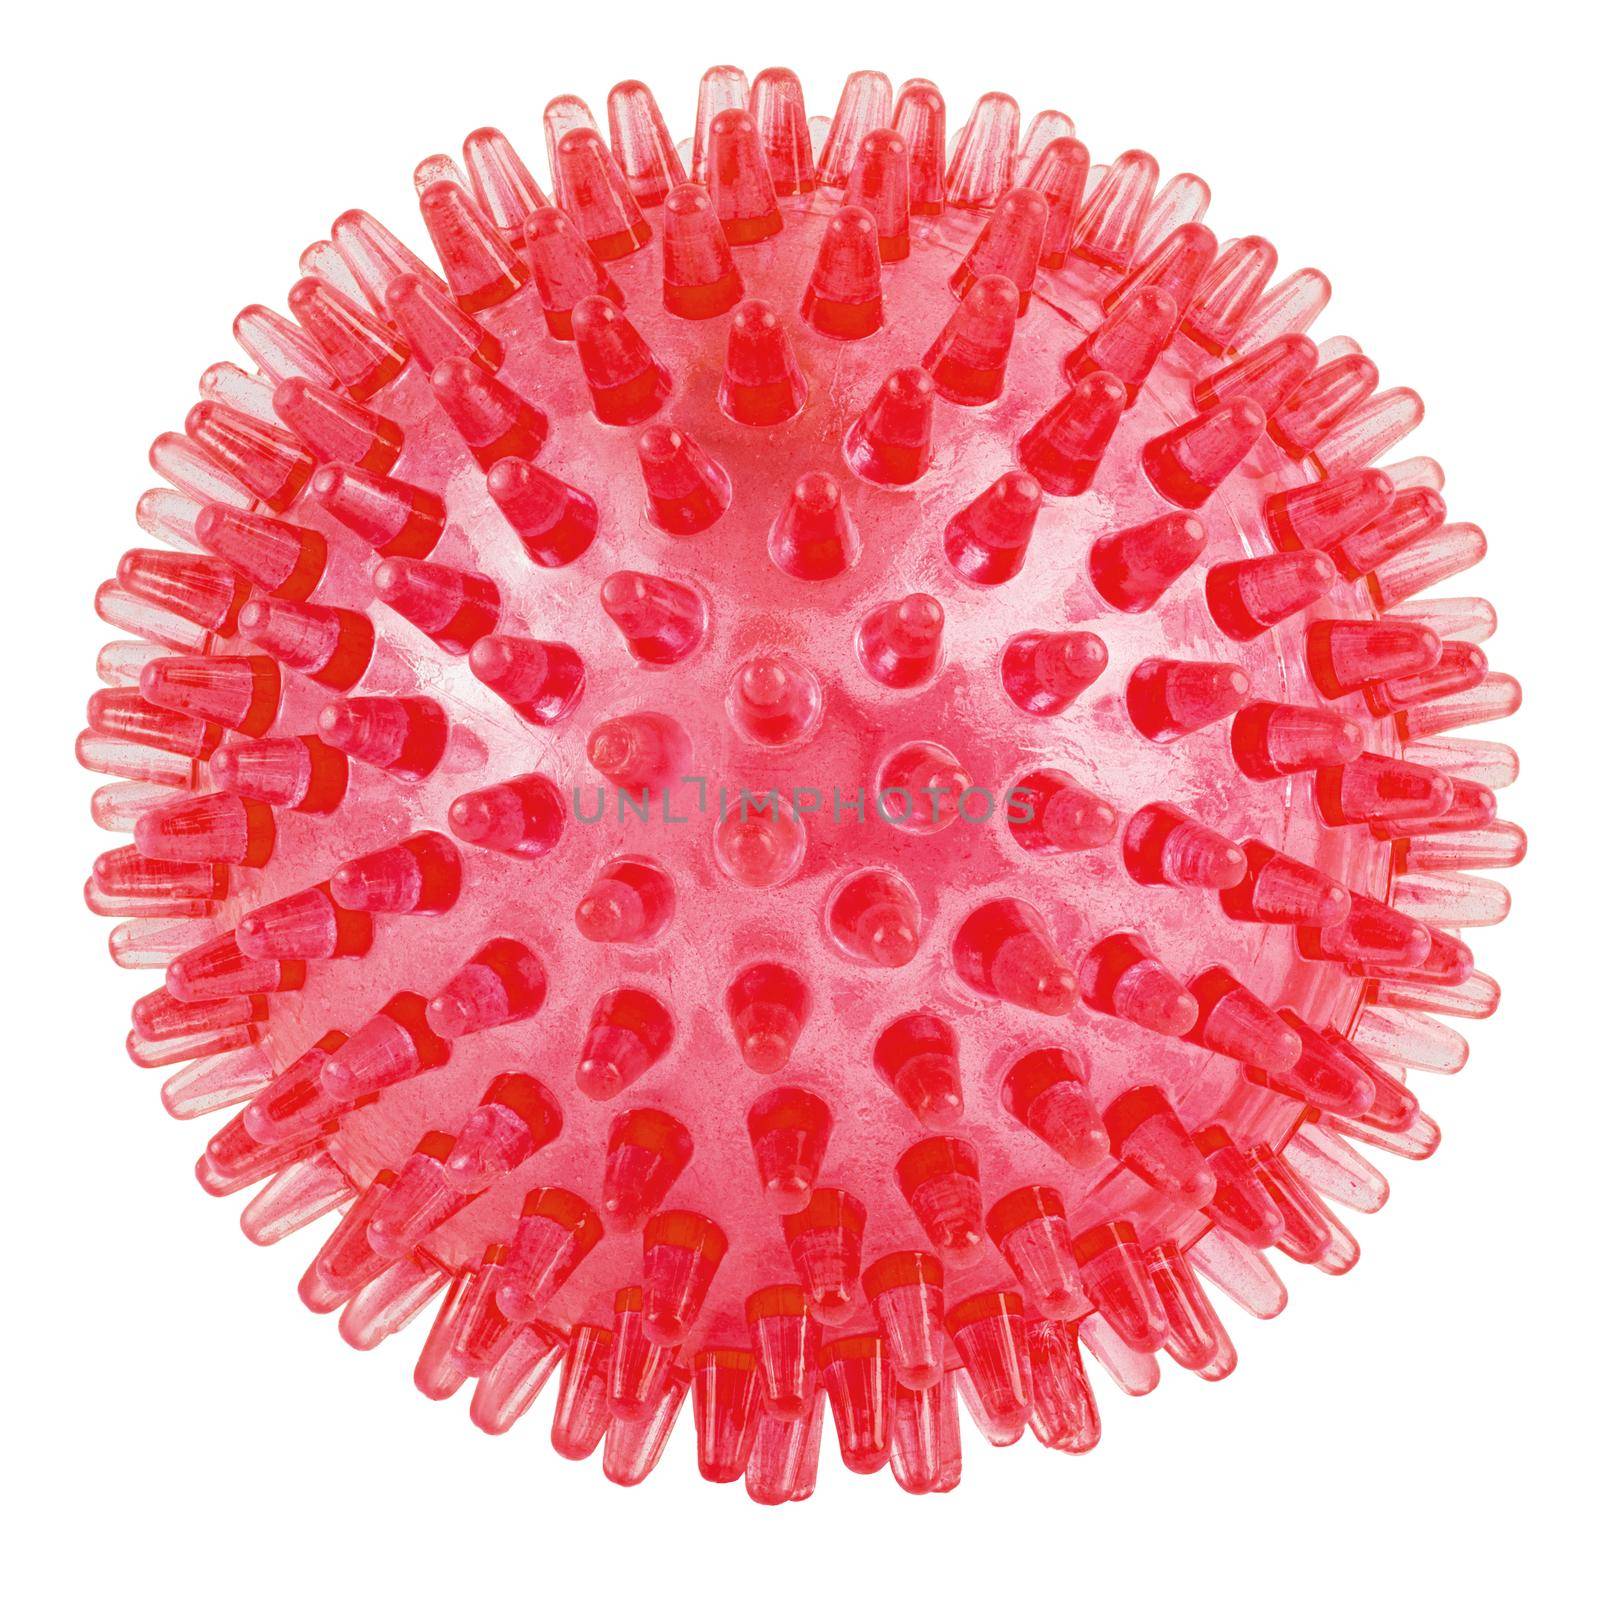 transparent red spiked plastic ball isolated on white background - massager, dog toy and COVID-19 coronavirus symbol and model